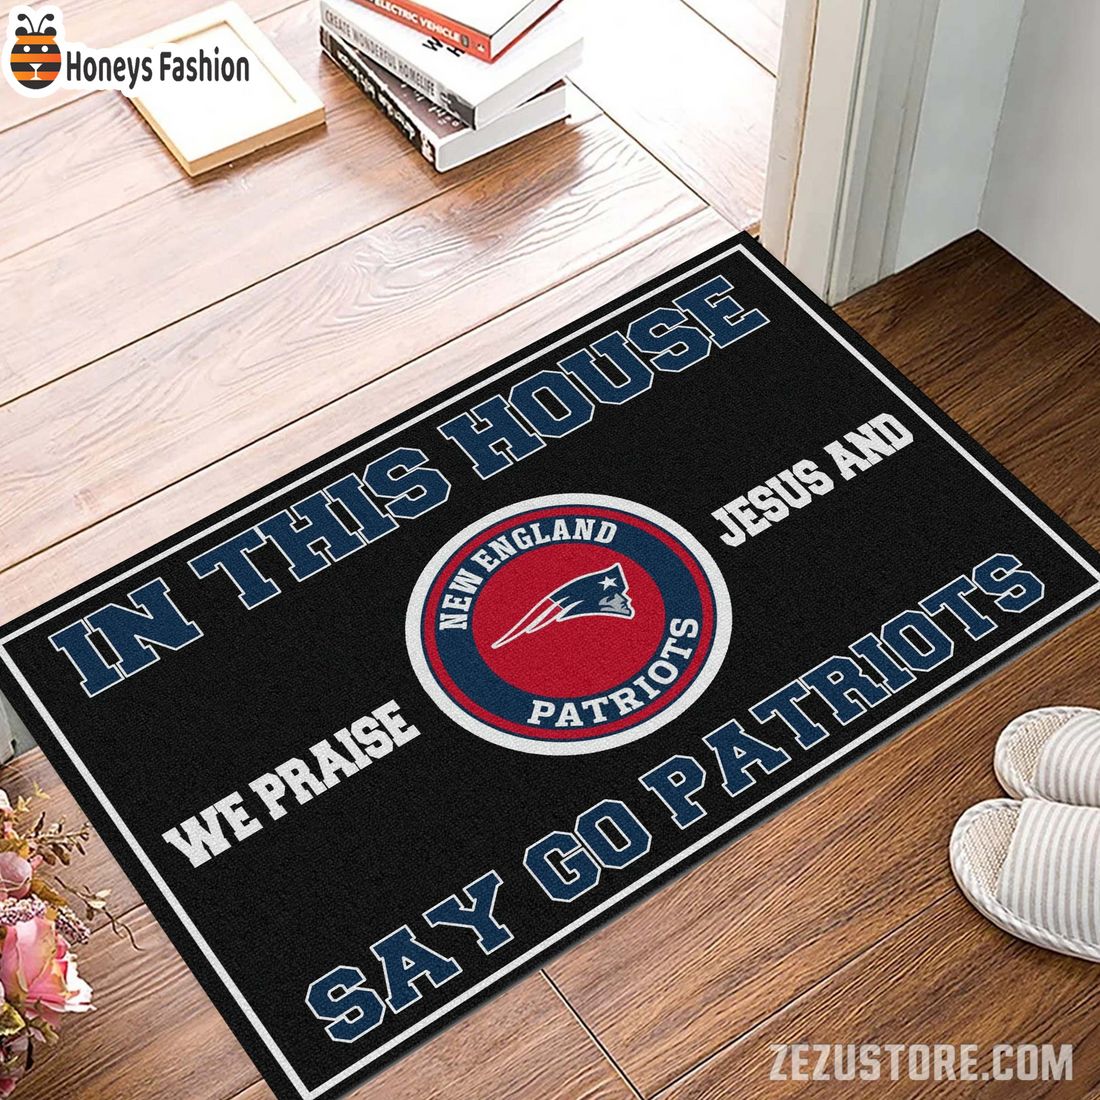 In this house we praise jesus and say go Patriots doormat